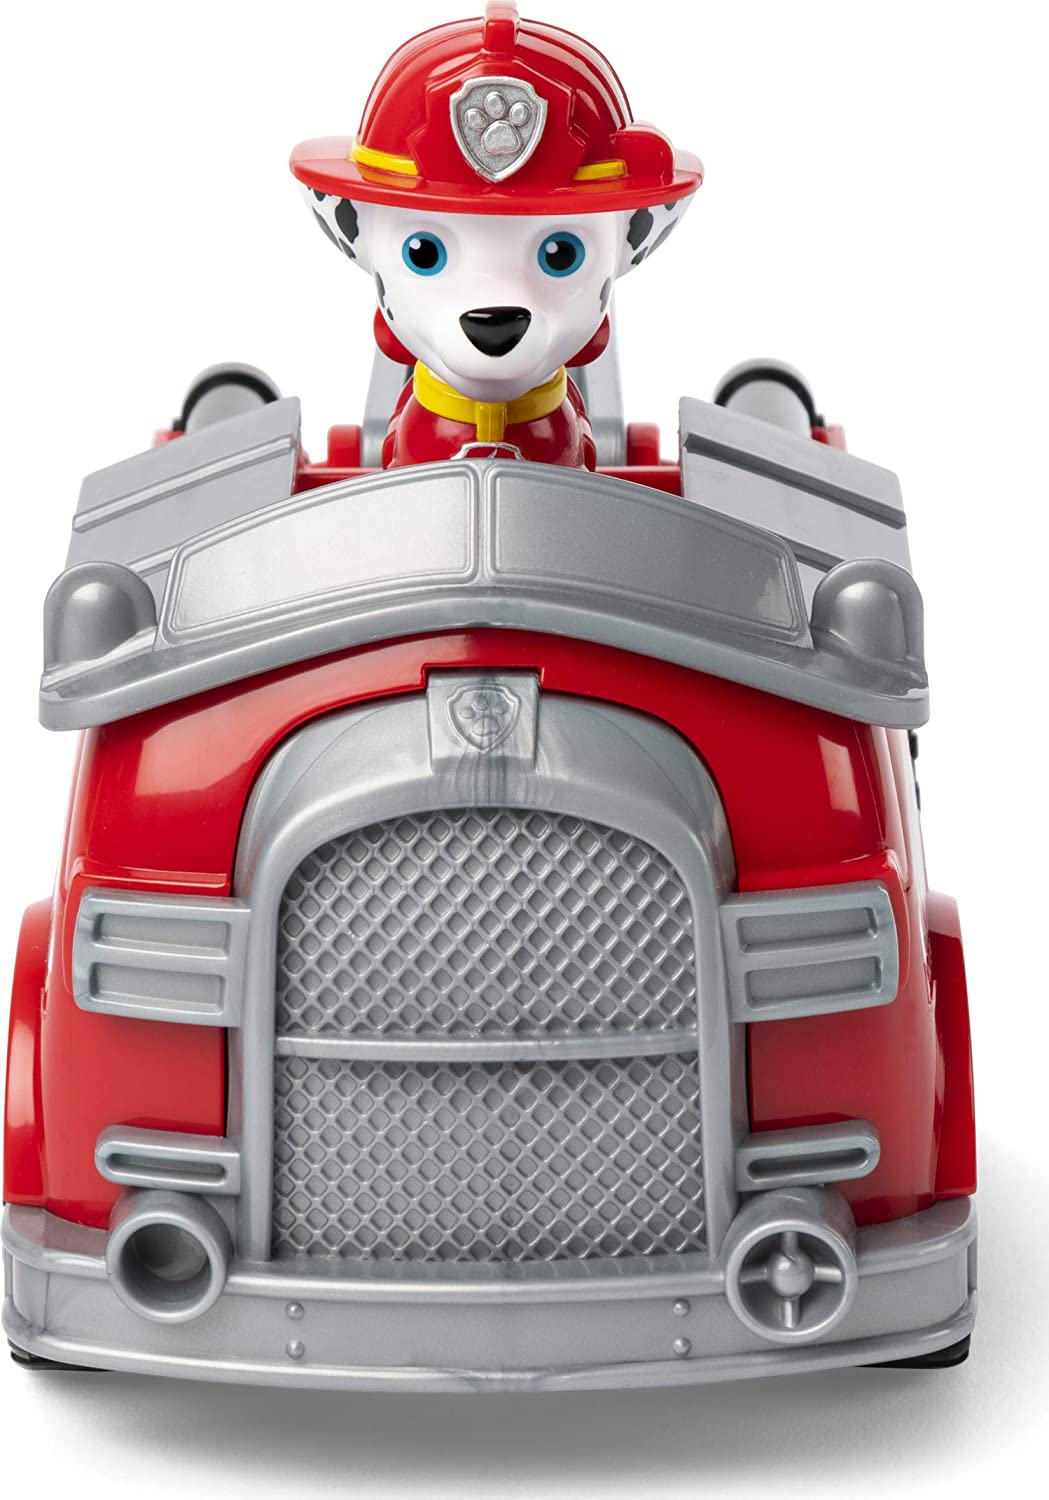 PAW Patrol 6054135 Marshall’s Fire Engine Vehicle with Collectible Figure